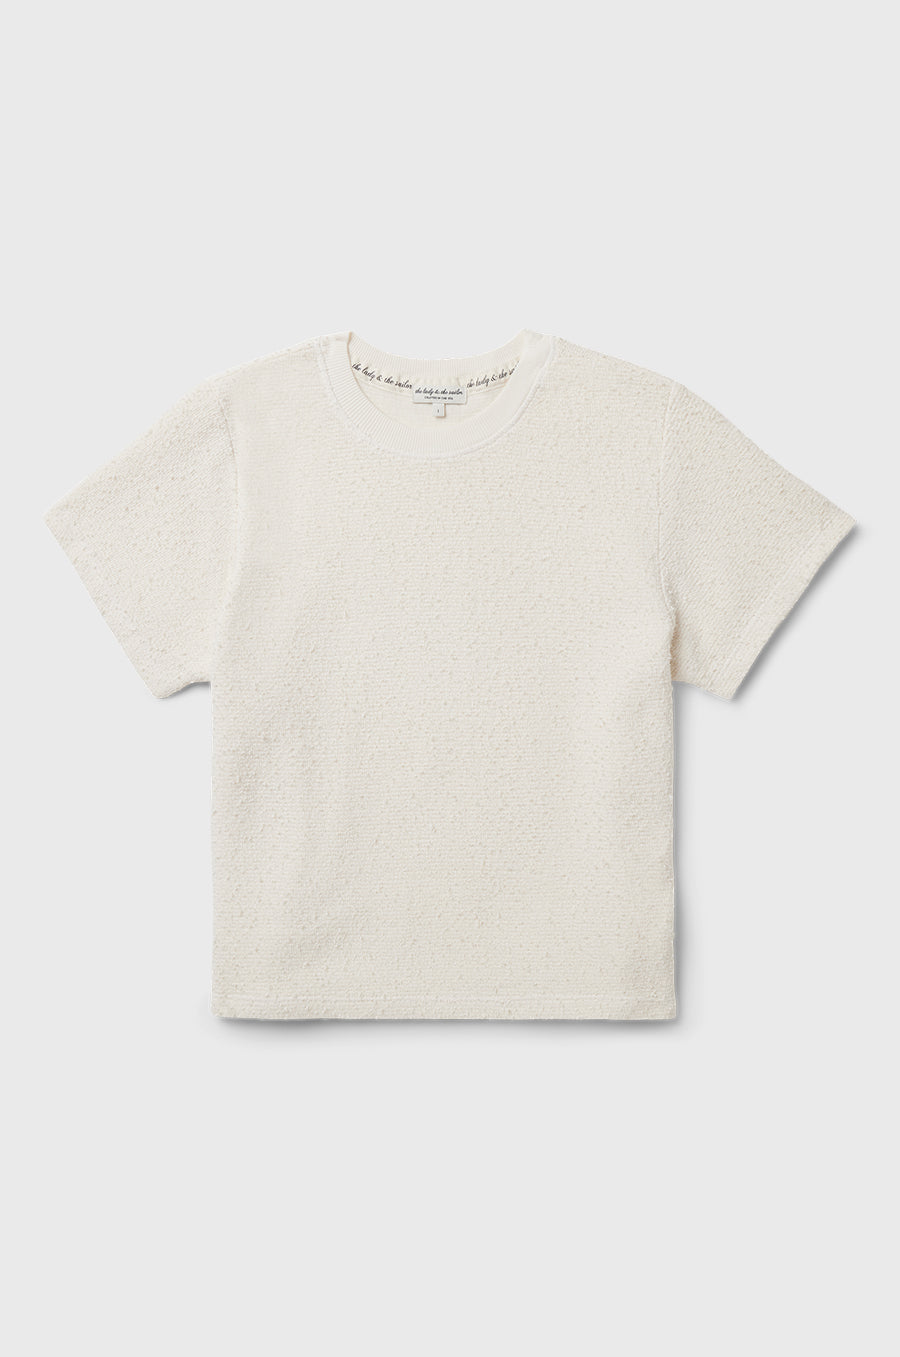 the lady & the sailor SS Classic Tee in Vanilla Boucle.